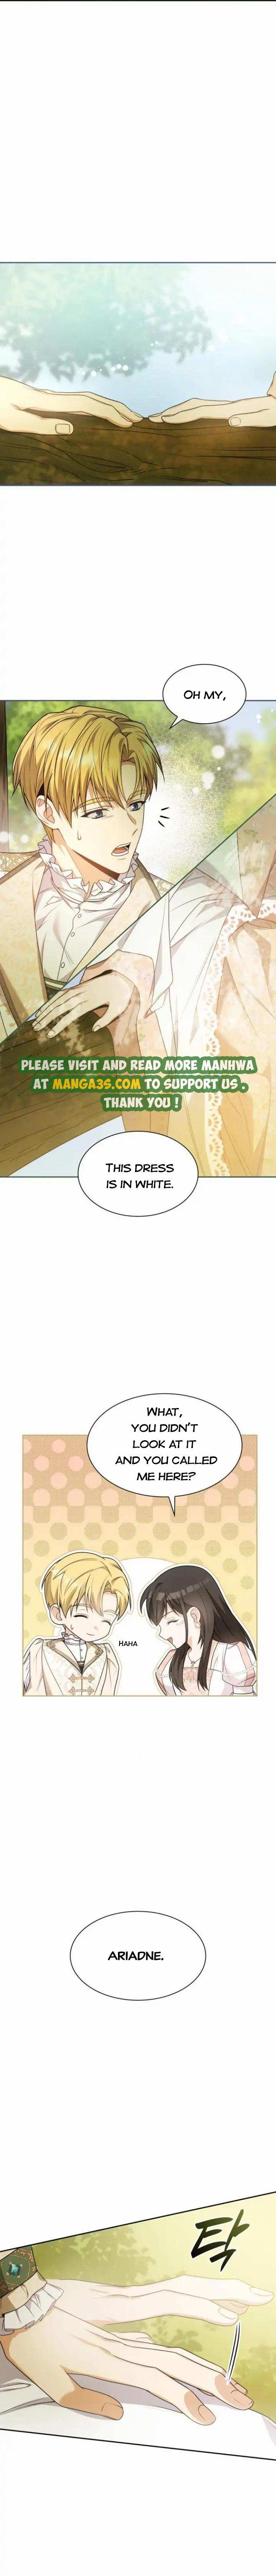 Sister, I Am the Queen in This Life chapter 14 - page 2